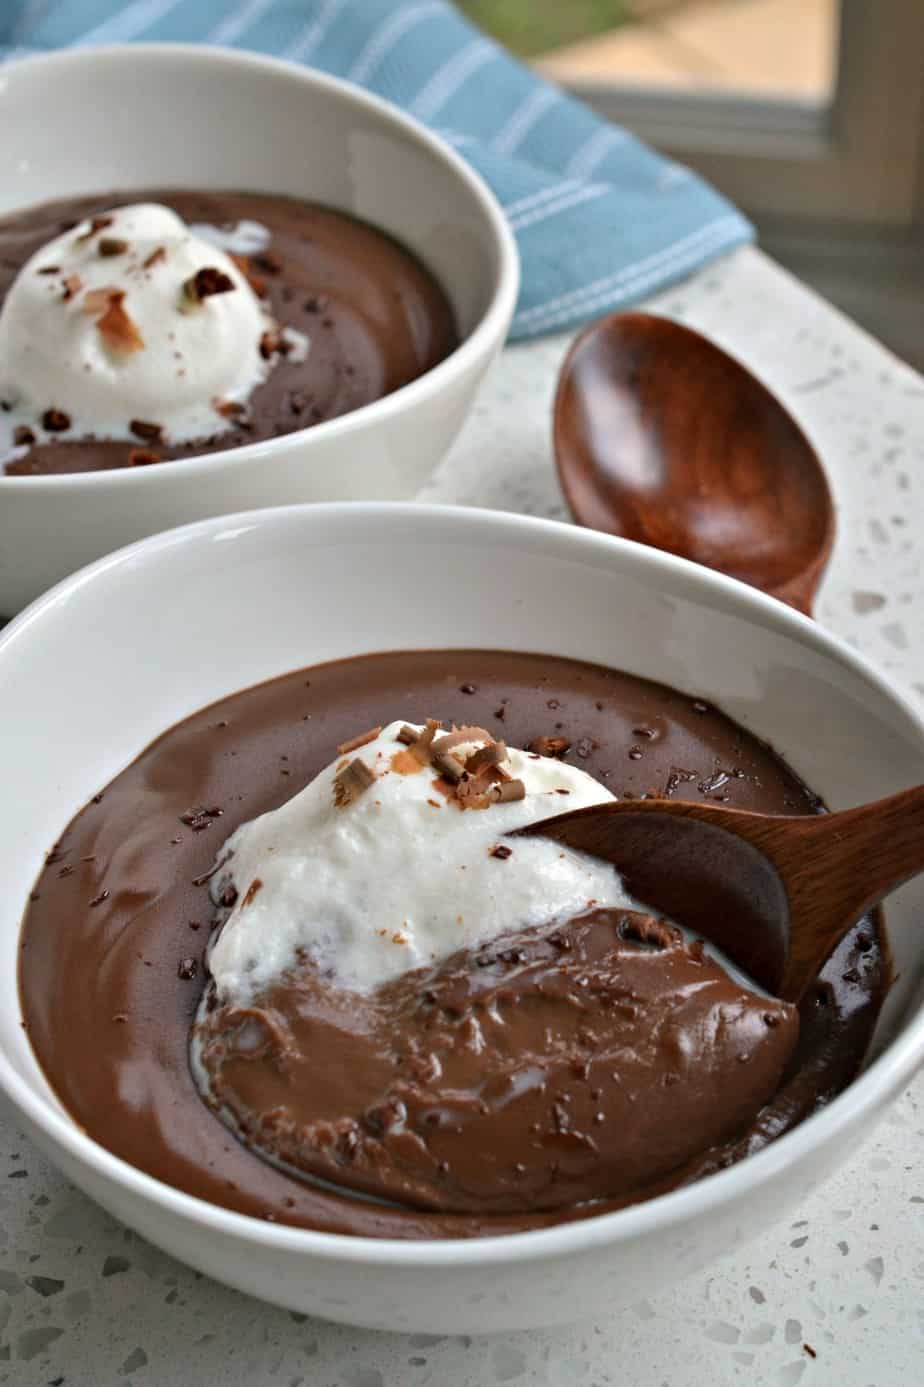 This rich and velvety smooth kid friendly chocolate pudding comes together quickly right on your stovetop in less than twenty minutes.